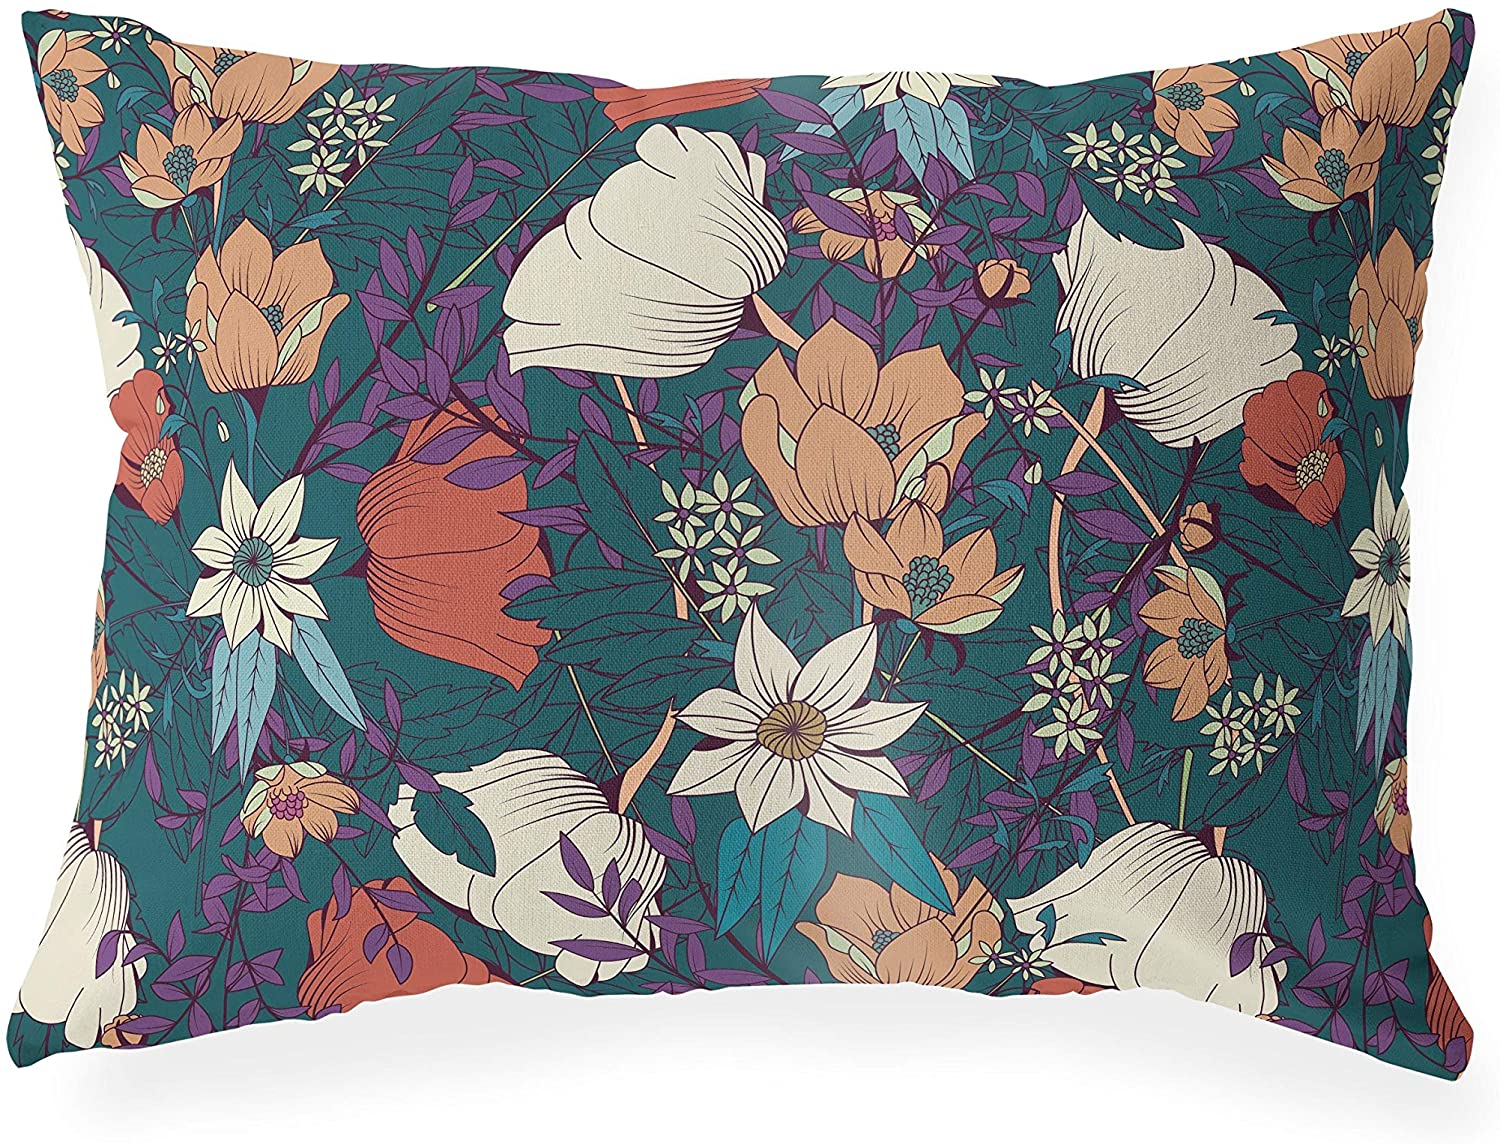 UKN Lumbar Pillow Green Floral Modern Contemporary Polyester Single Removable Cover